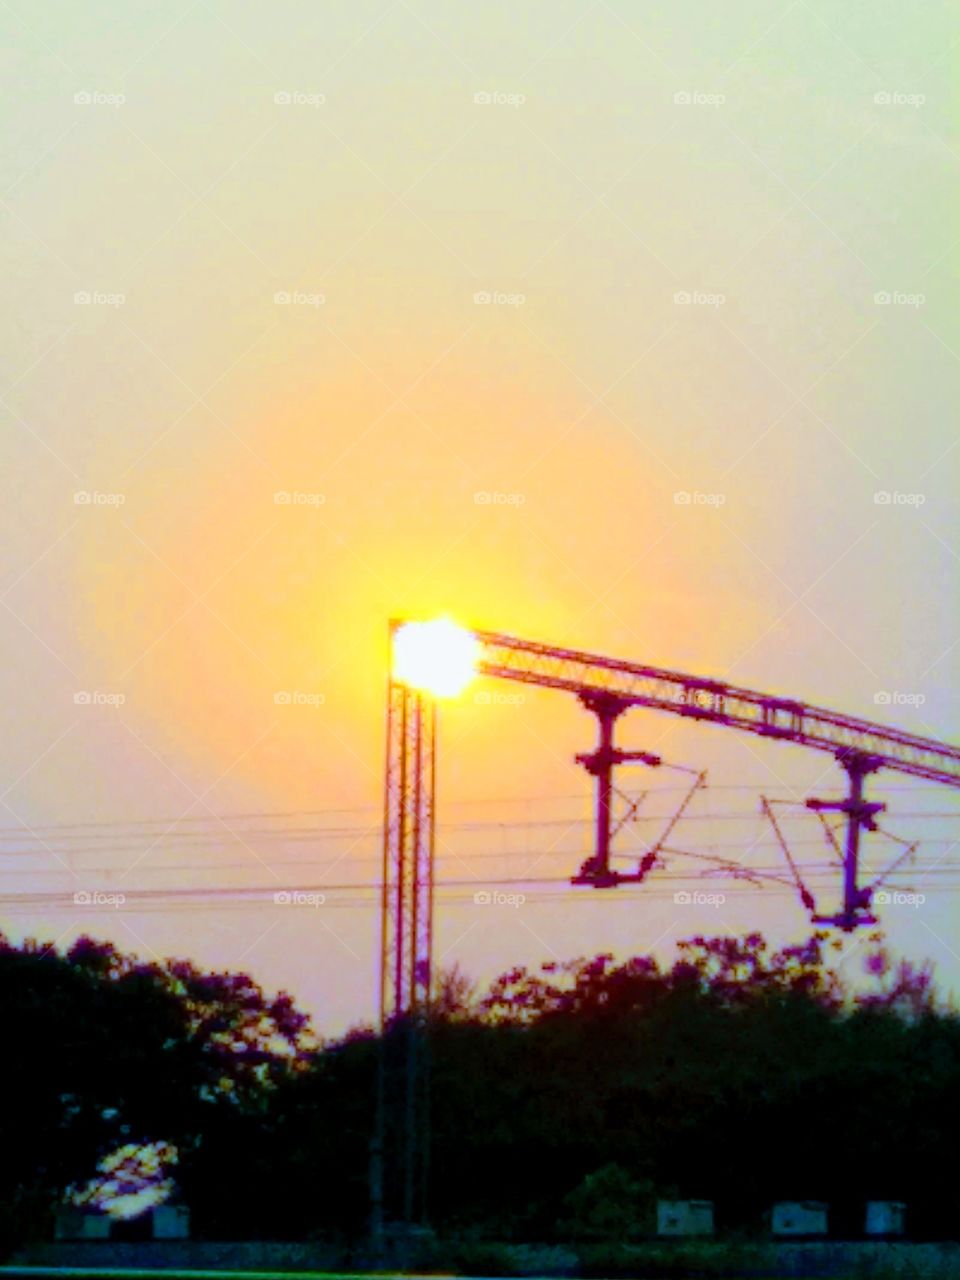 at the time of evening I captured this photo in the rail way.